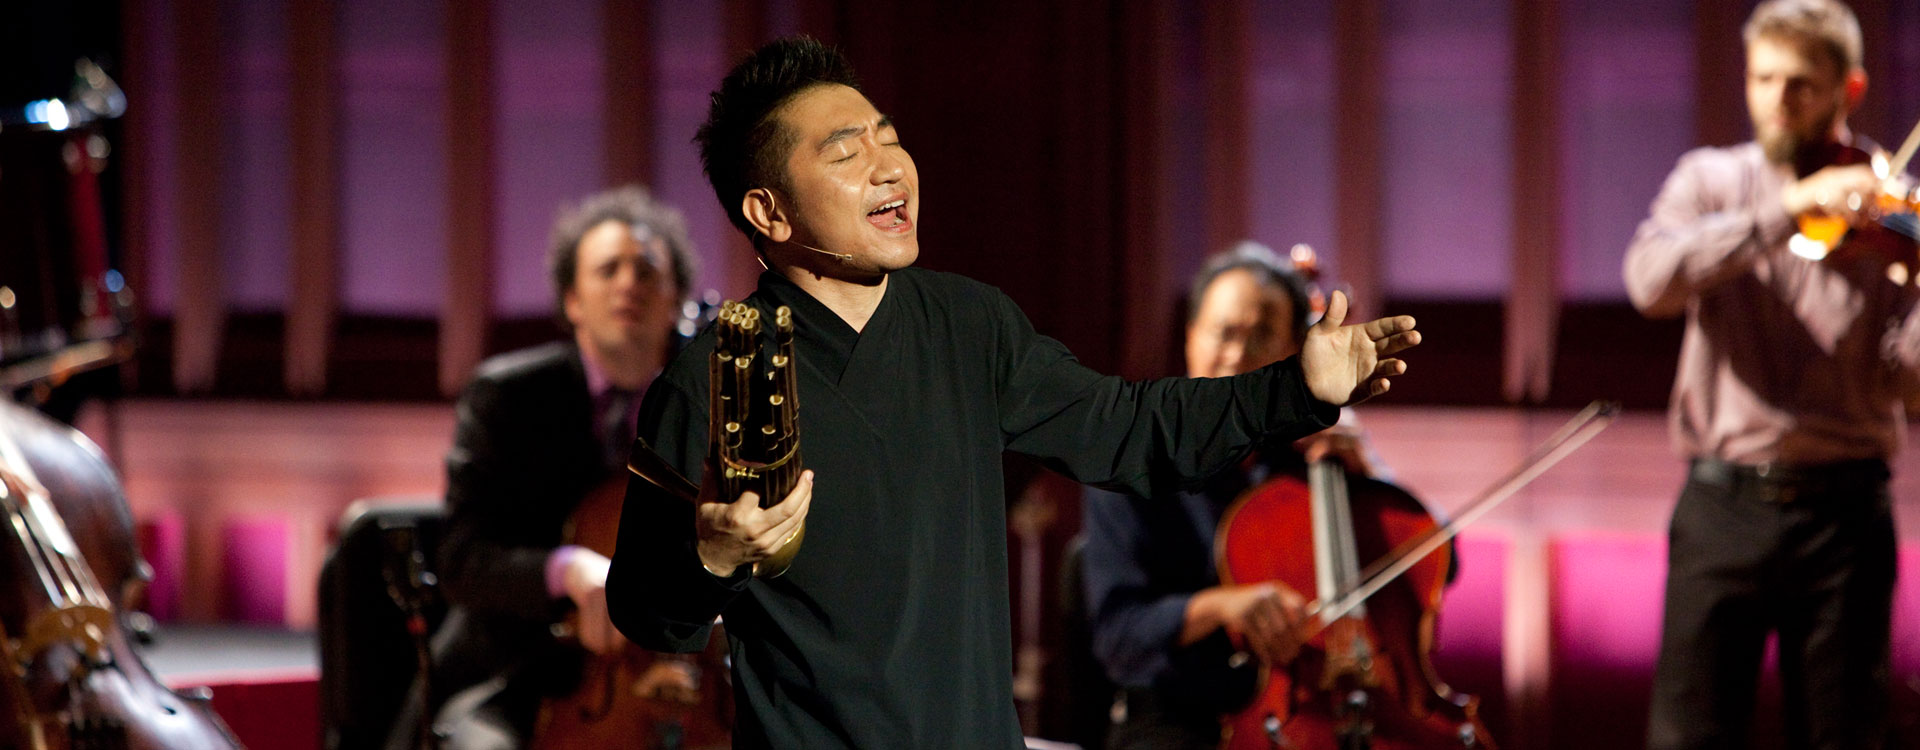 The Silkroad Ensemble with Yo-Yo Ma live from Tanglewood